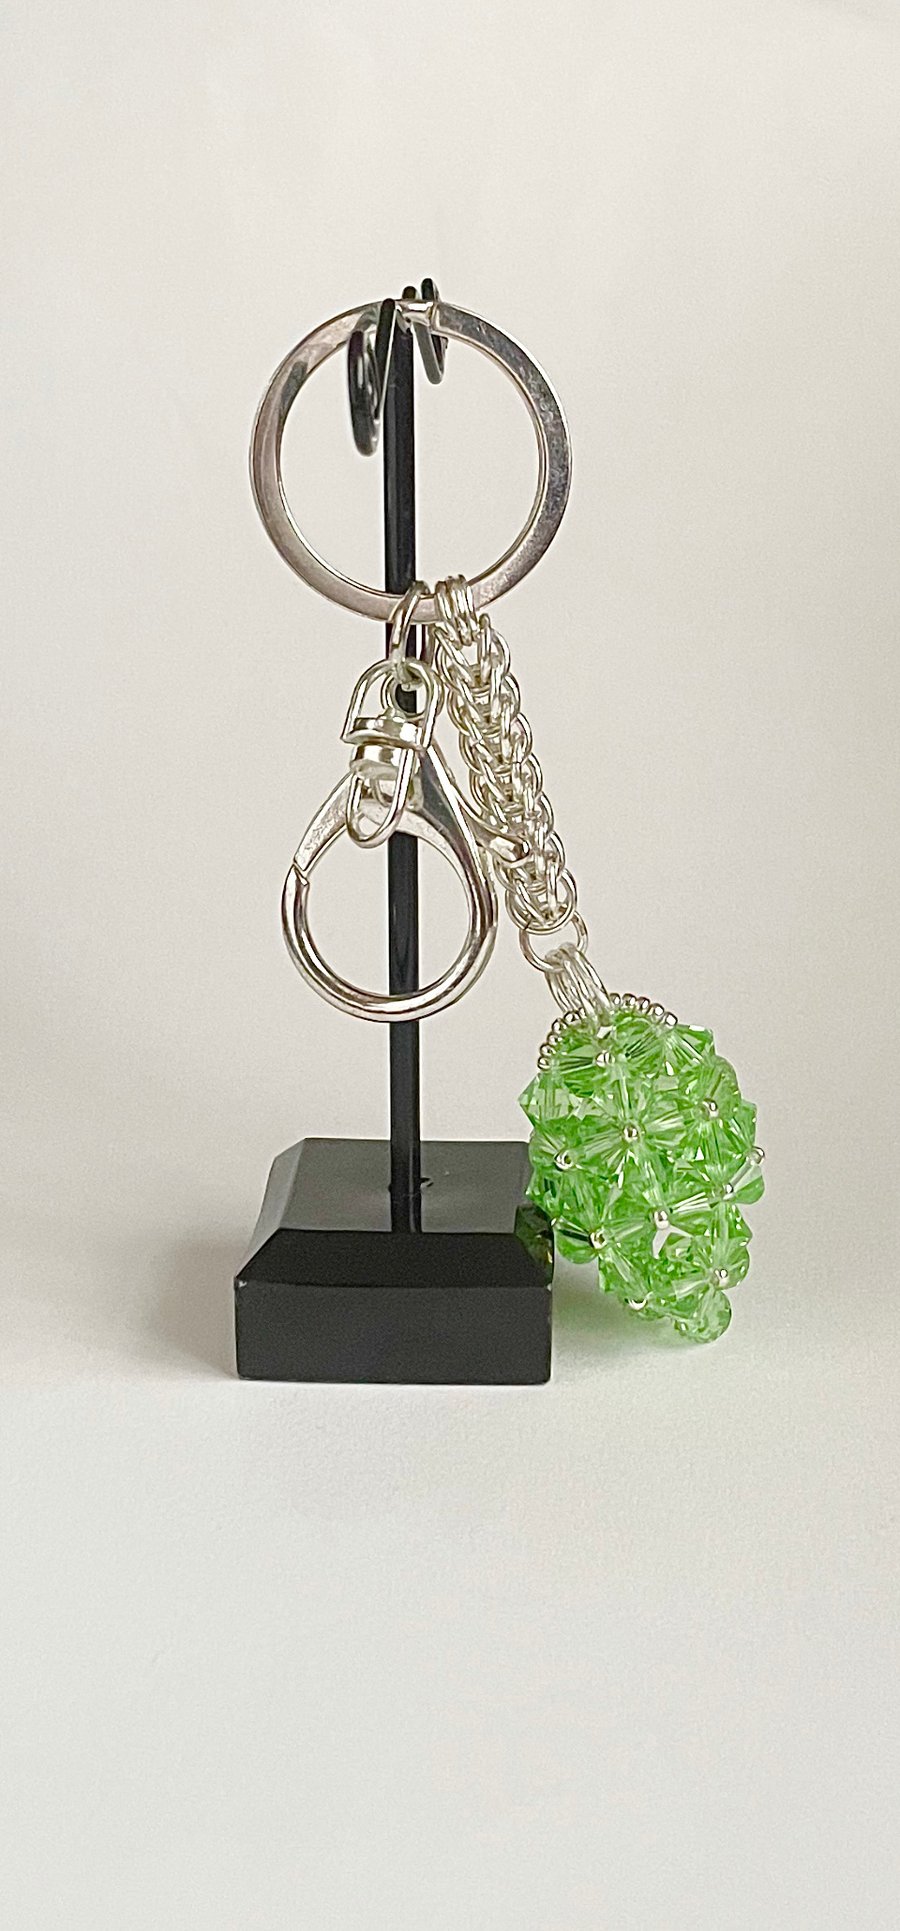 Handbag Charm, Egg Shaped Peridot Crystal with a Chainmaille Chain and Keyring